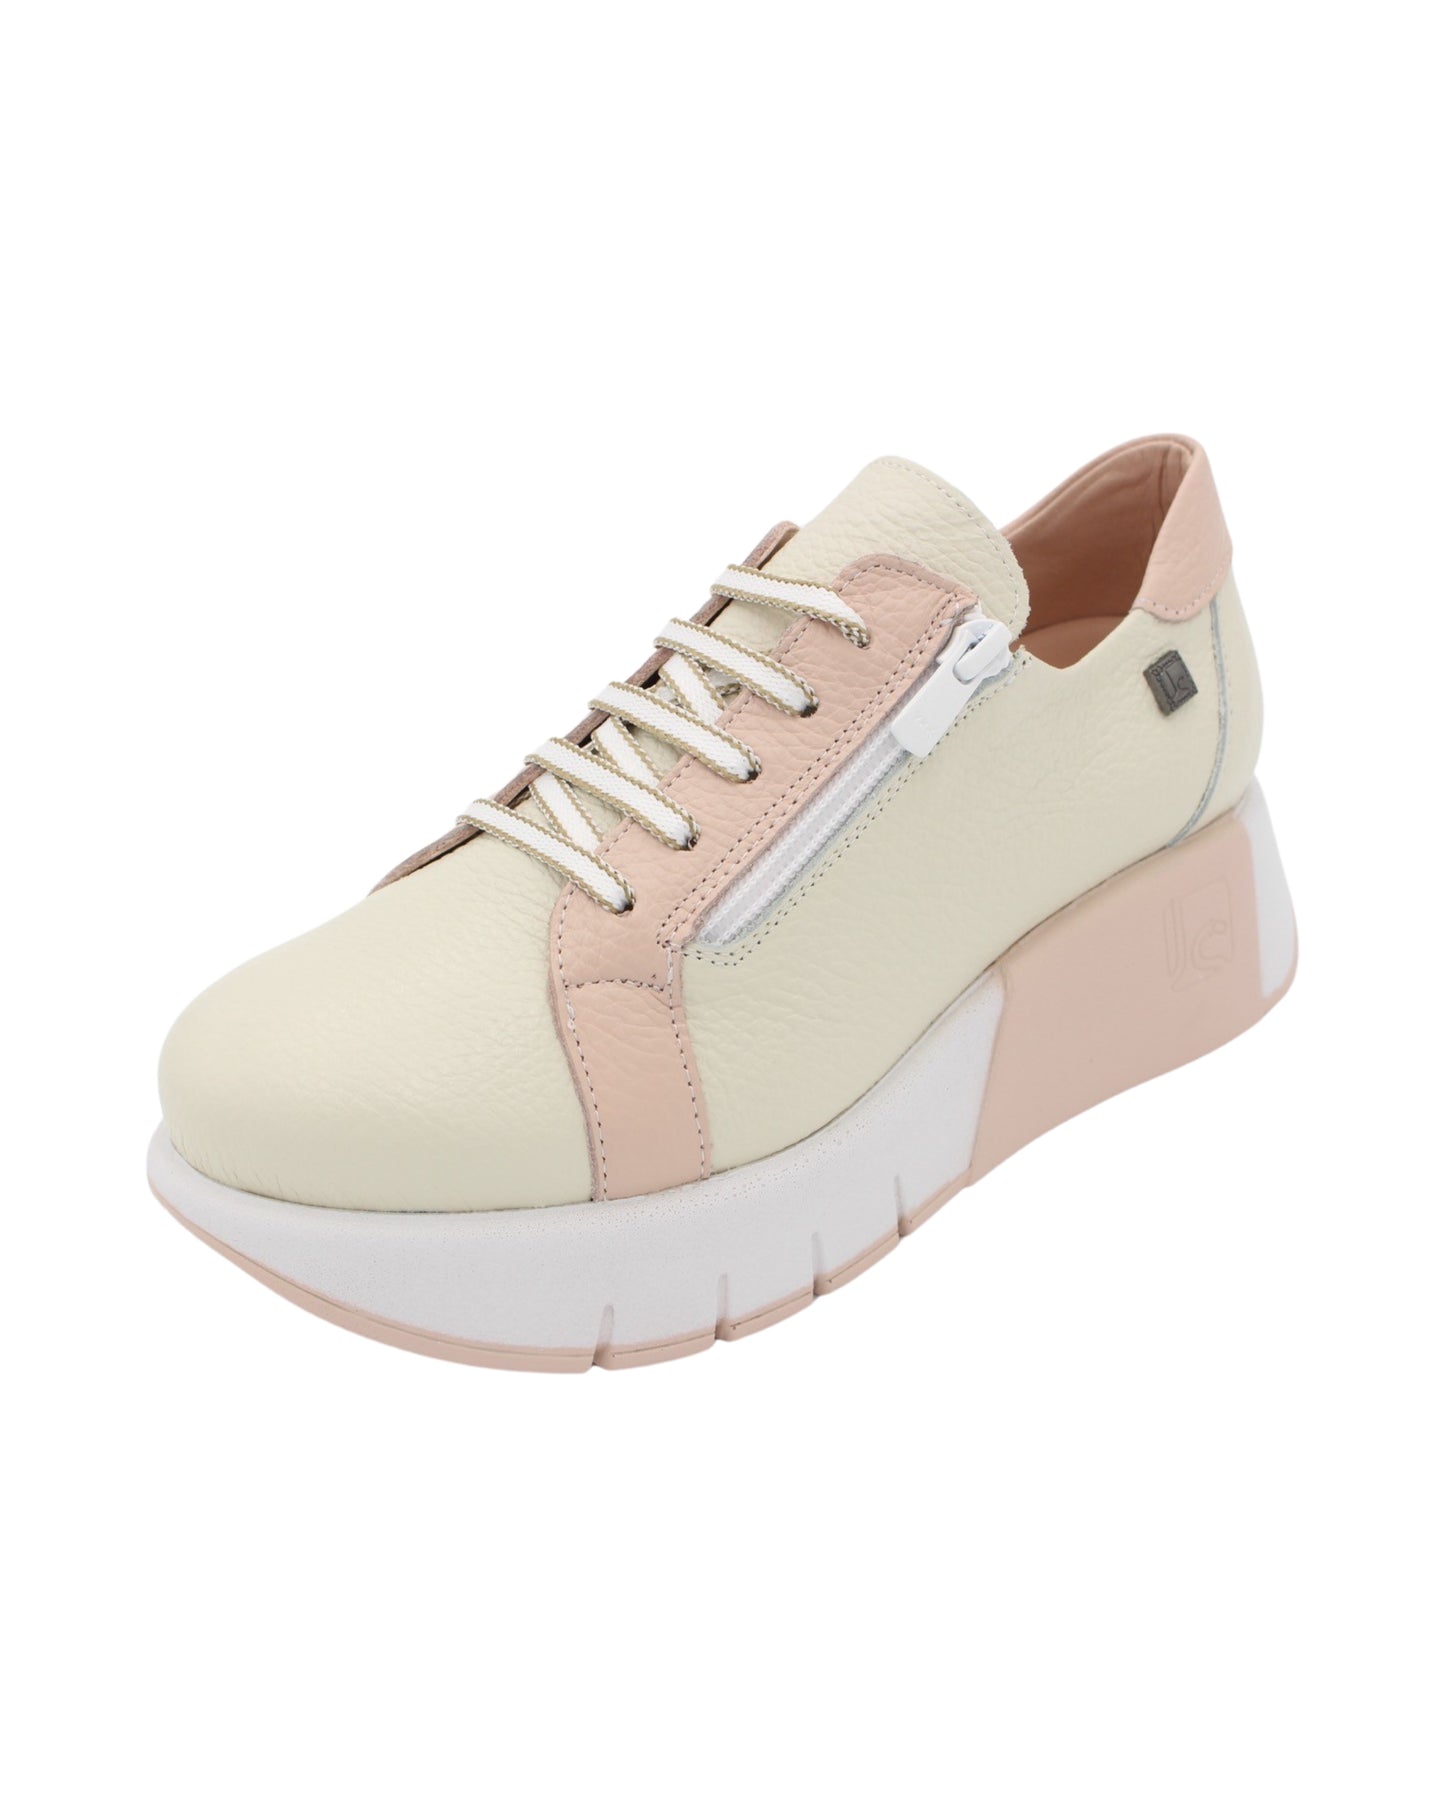 Jose Saenz - Ladies Shoes Trainers Cream,  Pink (1990)